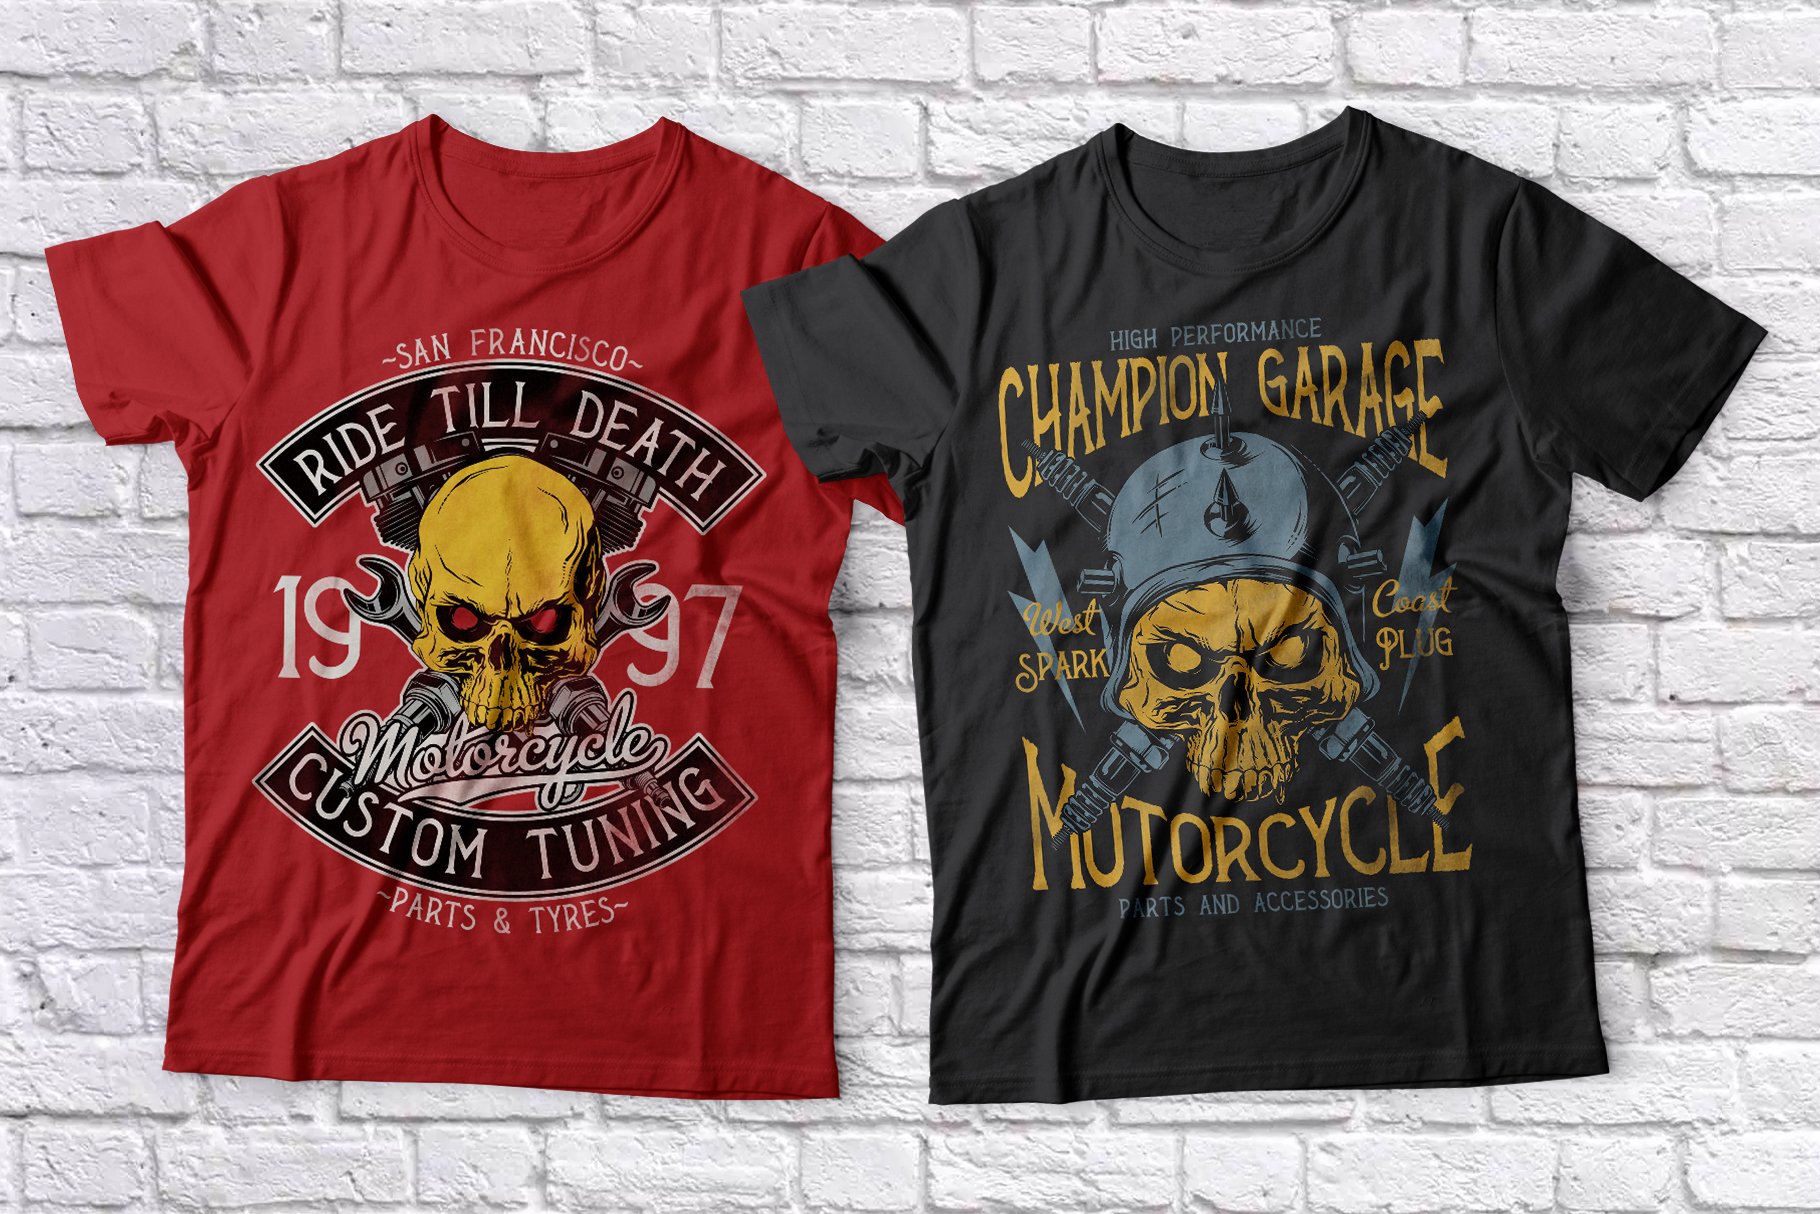 Red and black T-shirts with yellow skulls in helmets.